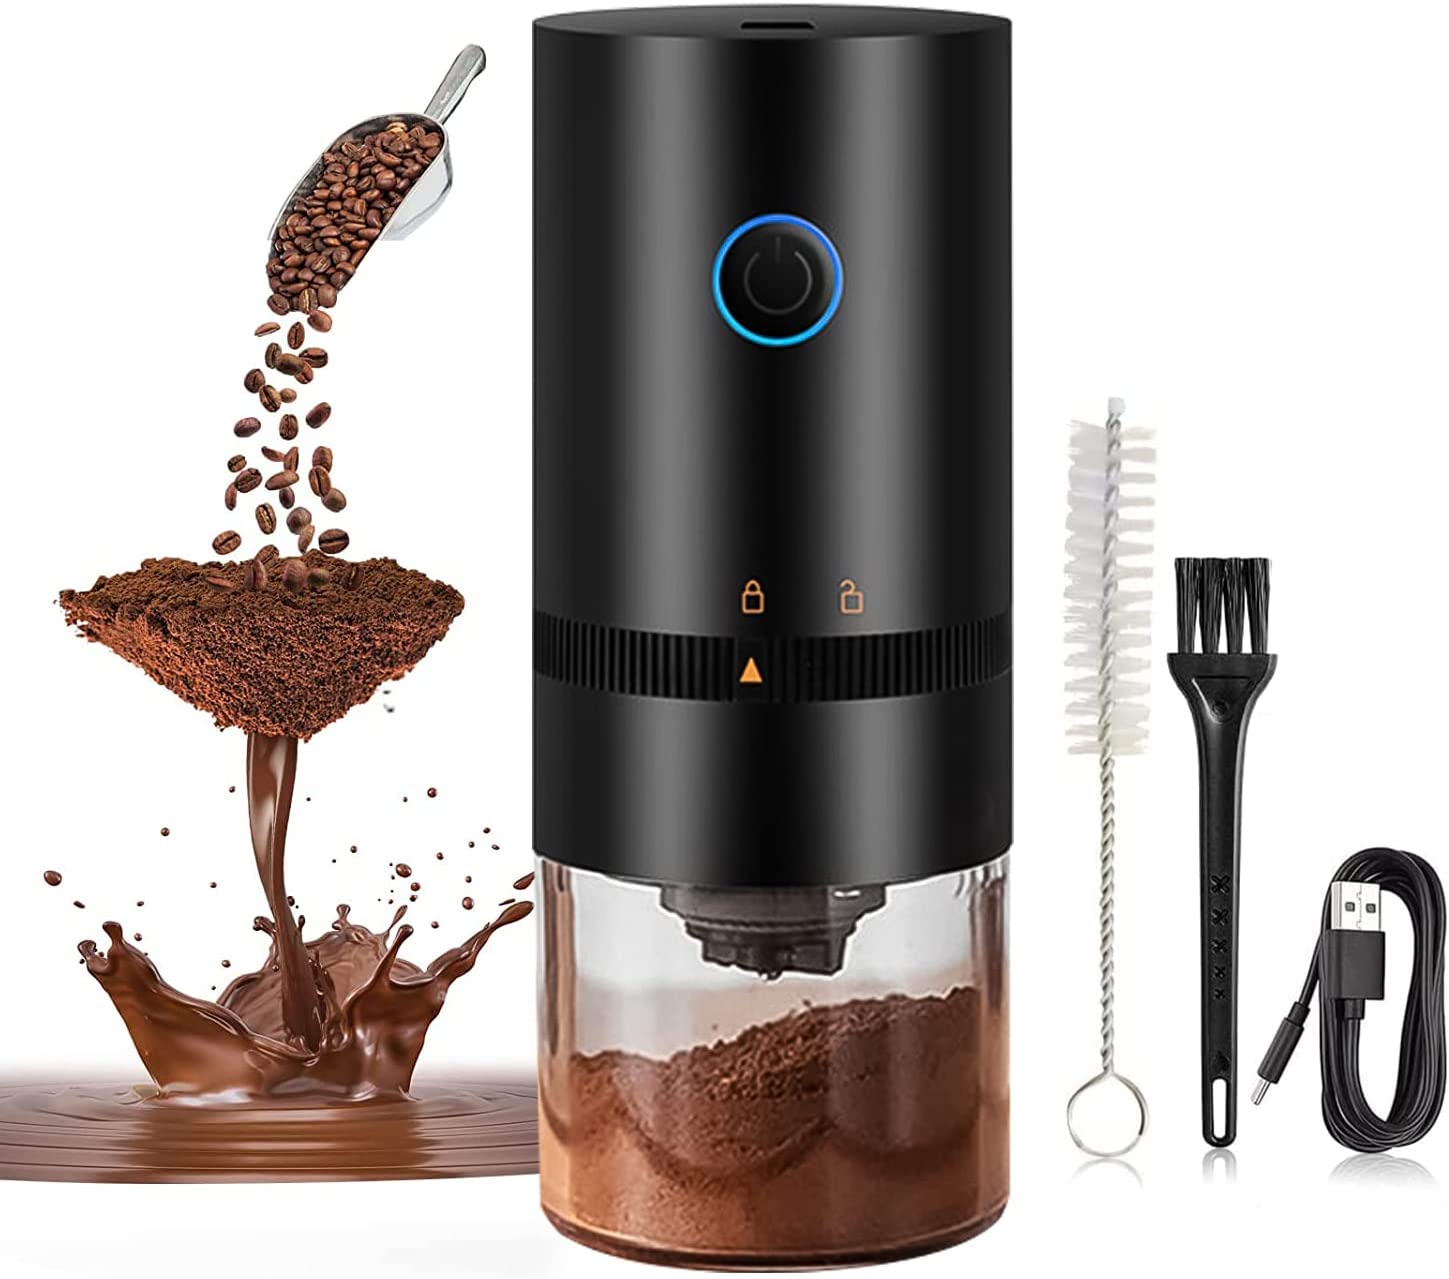 Coffee Grinder, Electric Coffee Bean Mill, with Aroma Friendly Ceramic Cone Grinder, 30 g Capacity Coffee Grinder with 2 Cleaning Brushes, Black